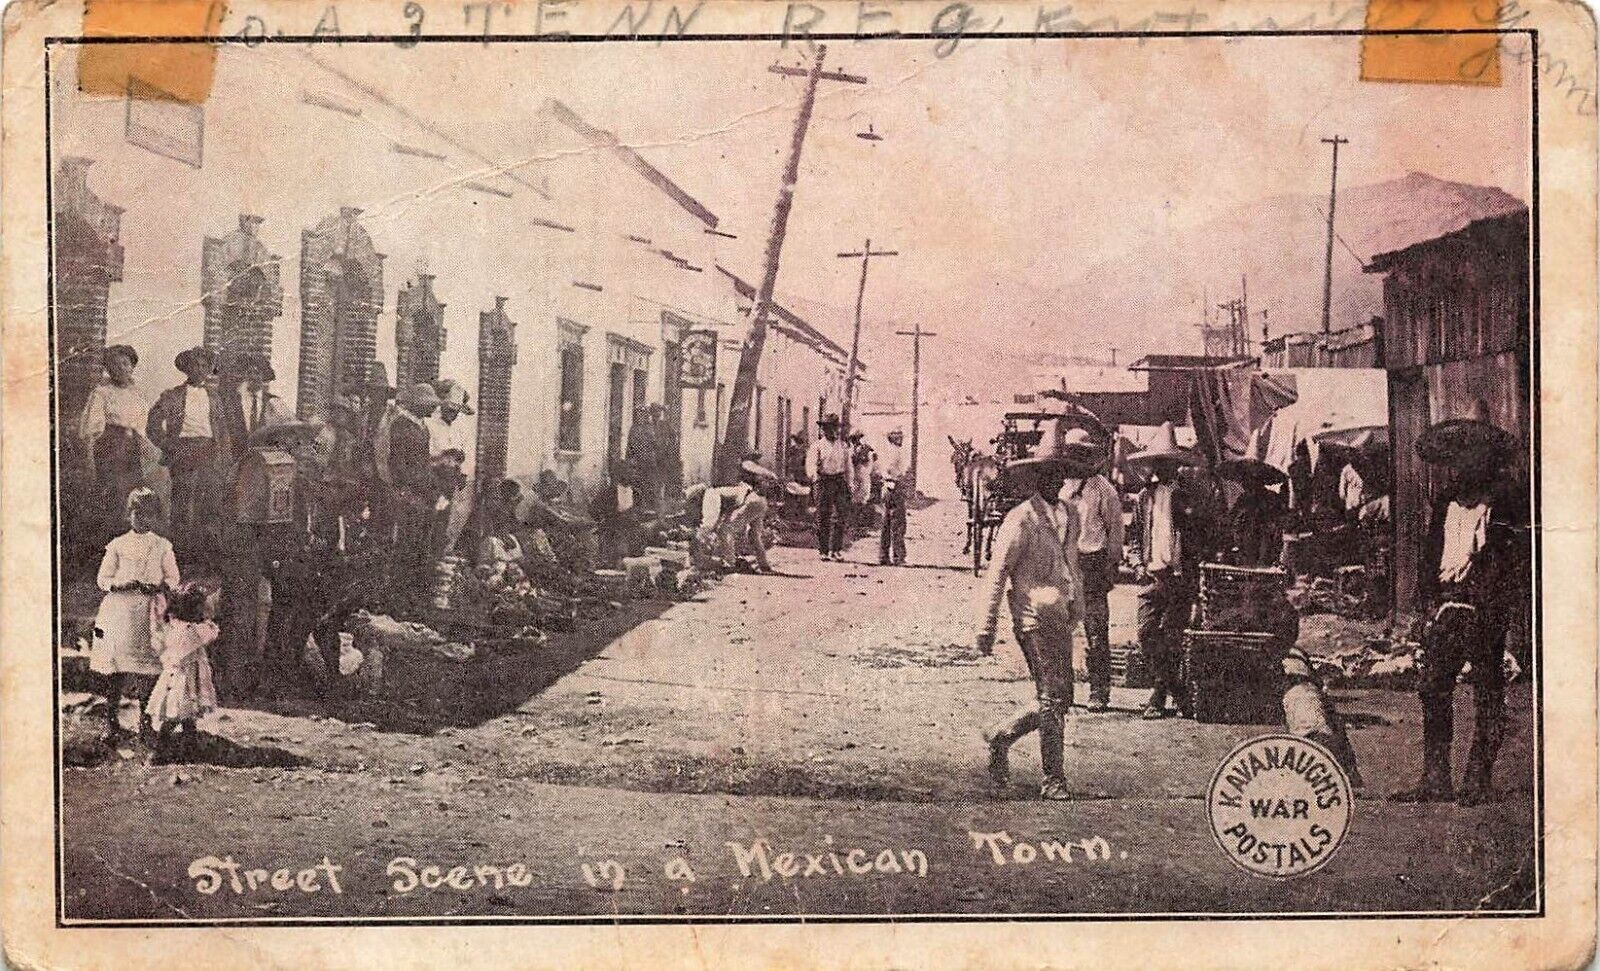 1917 MEXICO PHOTO POSTCARD: STREET SCENE IN A MEXICAN TOWN